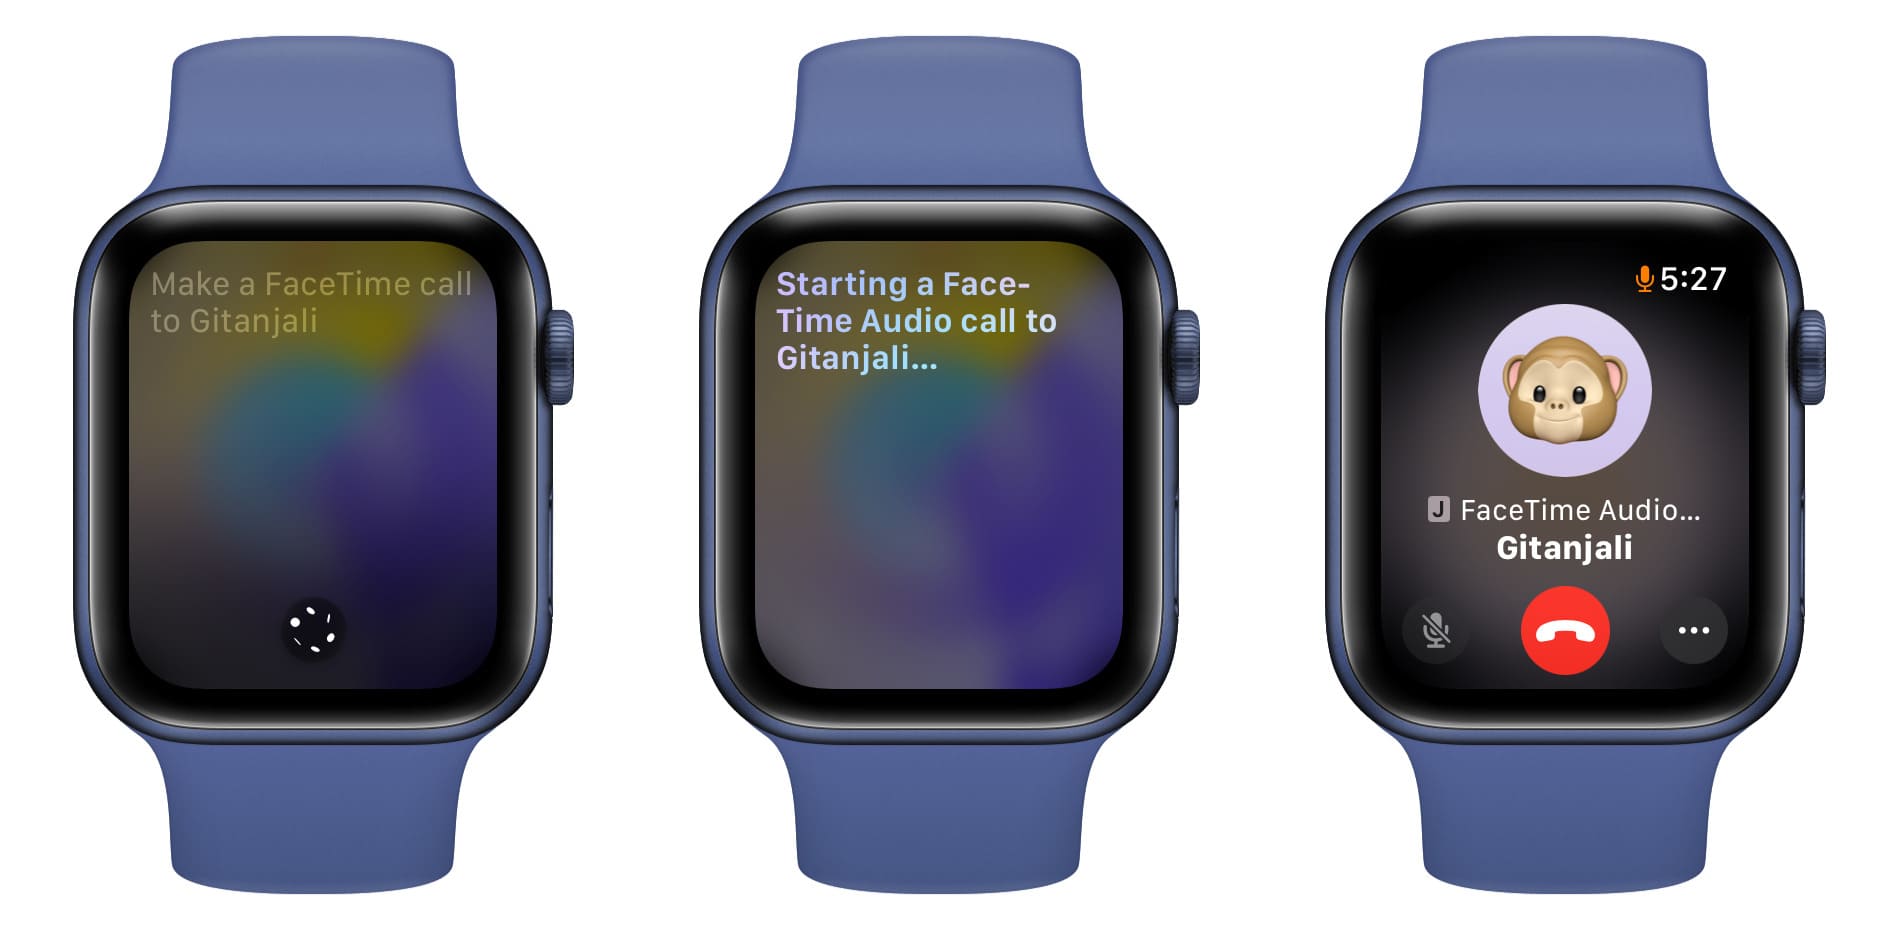 Making FaceTime call from Apple Watch using Siri